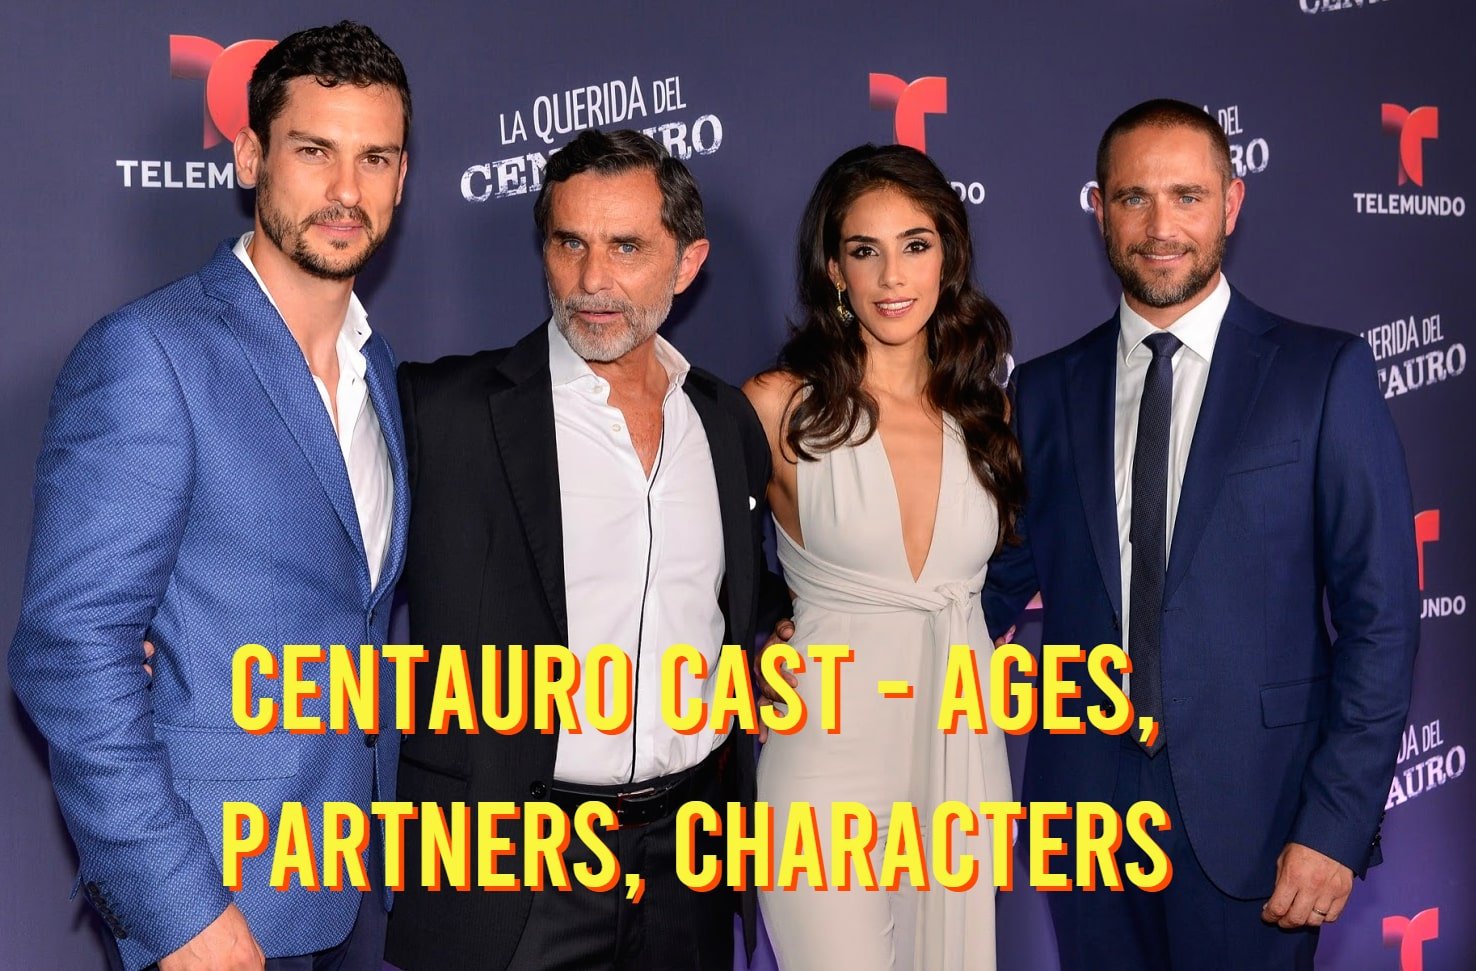 Centauro Cast - Ages, Partners, Characters